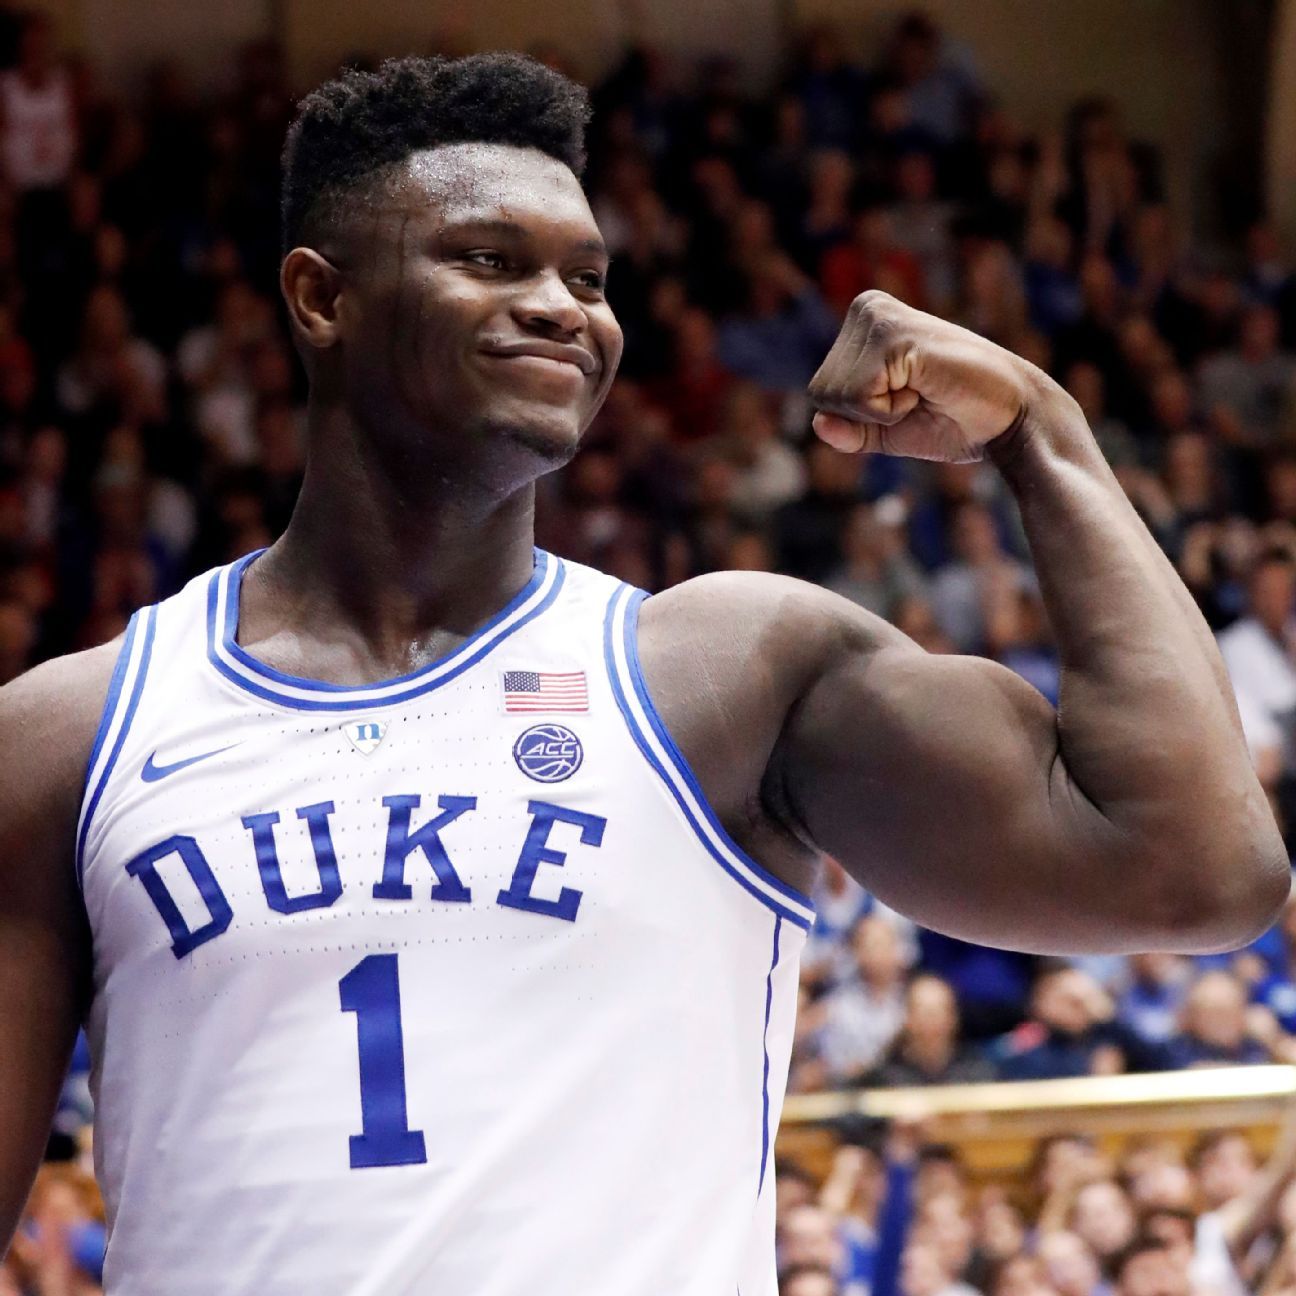 UNC-Duke tickets approaching Super Bowl prices because of Zion Williamson1296 x 1296